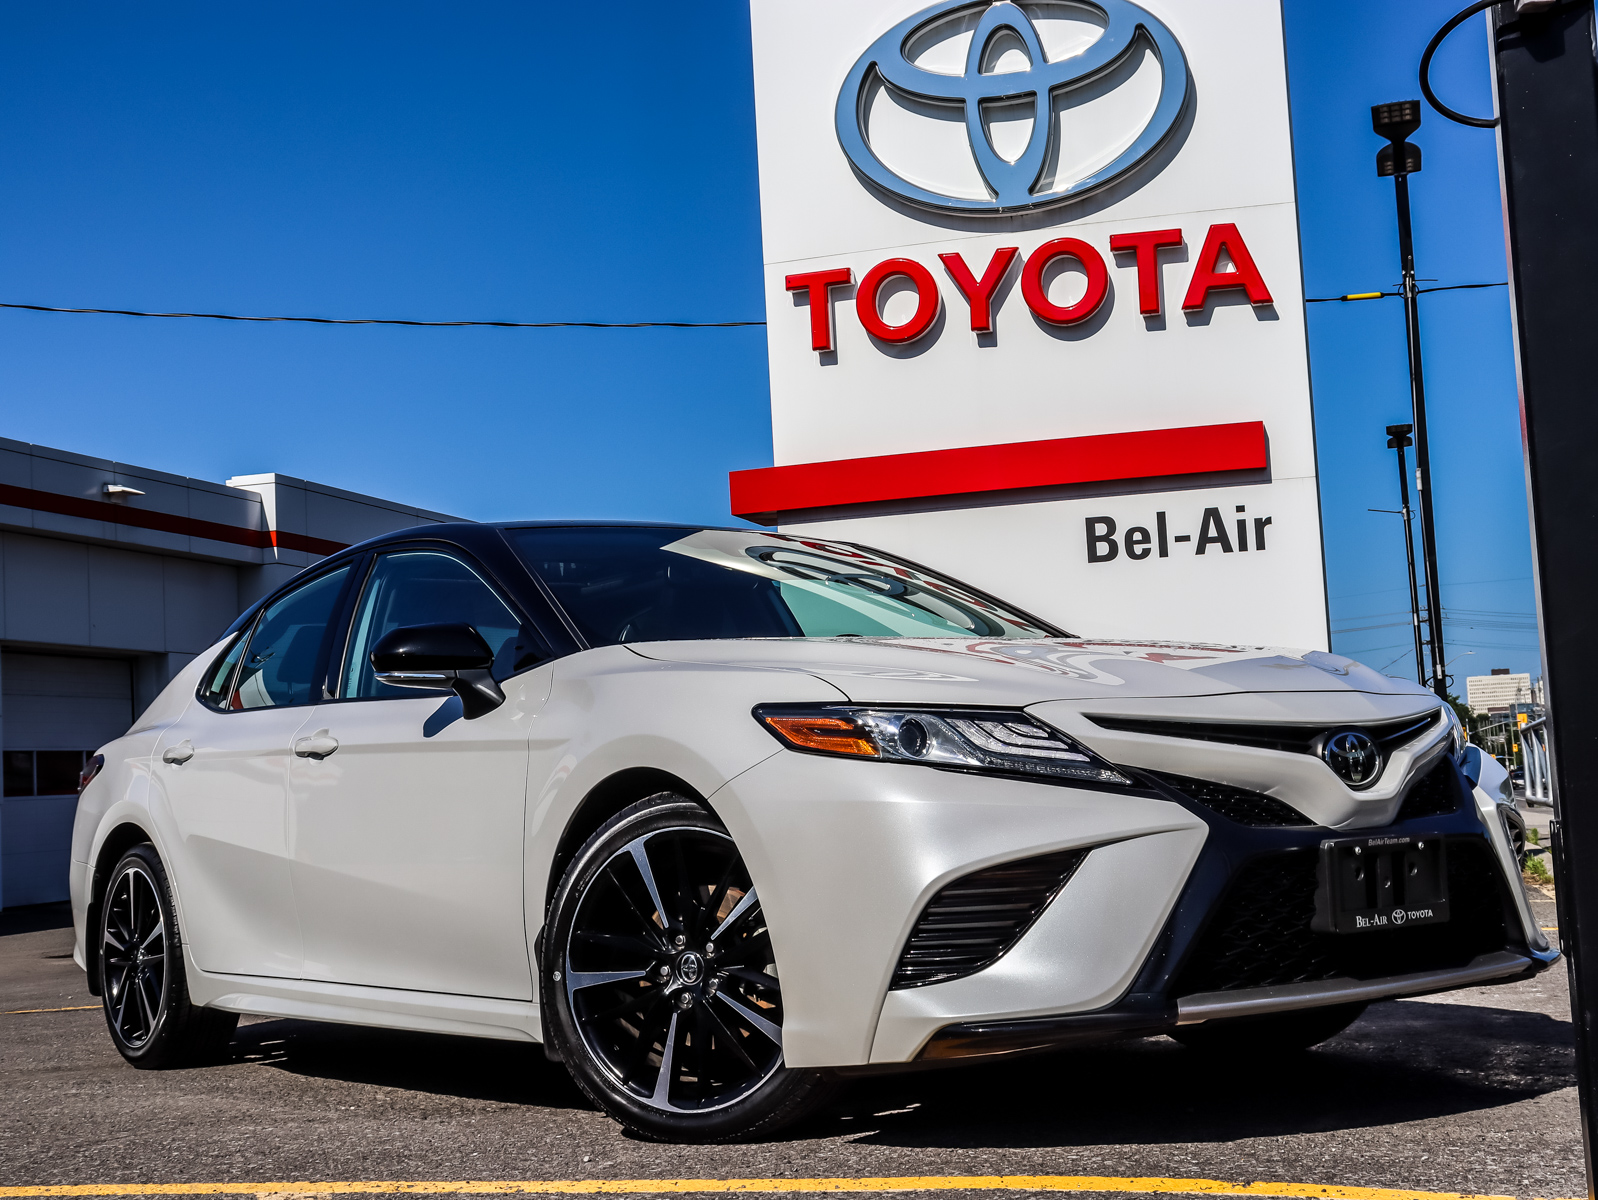 2019 Toyota Camry at Bel-Air Toyota